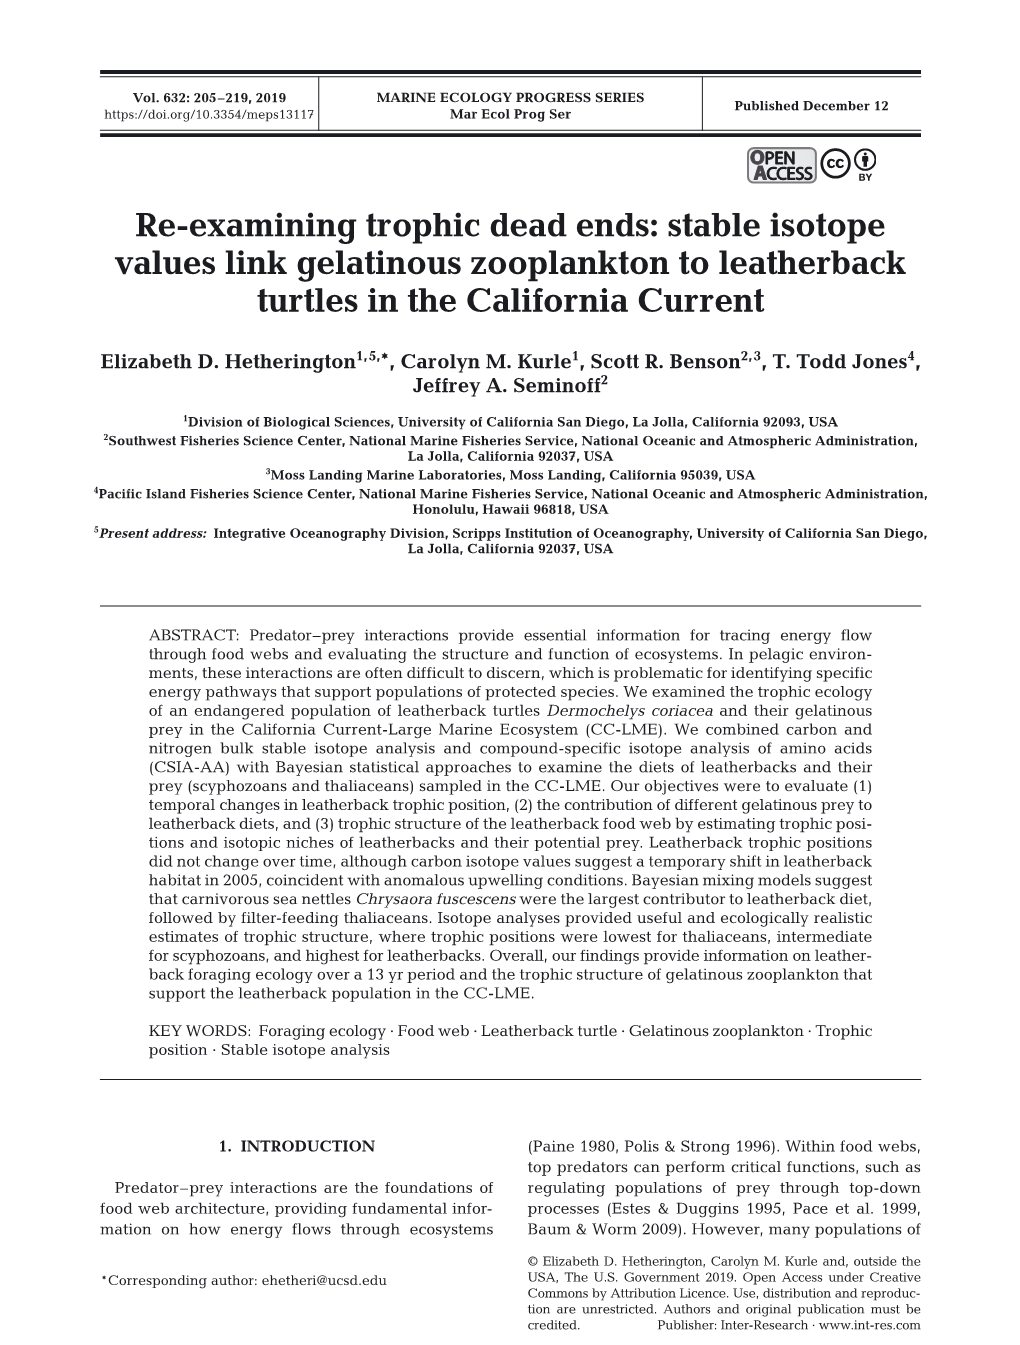 Re-Examining Trophic Dead Ends: Stable Isotope Values Link Gelatinous Zooplankton to Leatherback Turtles in the California Current